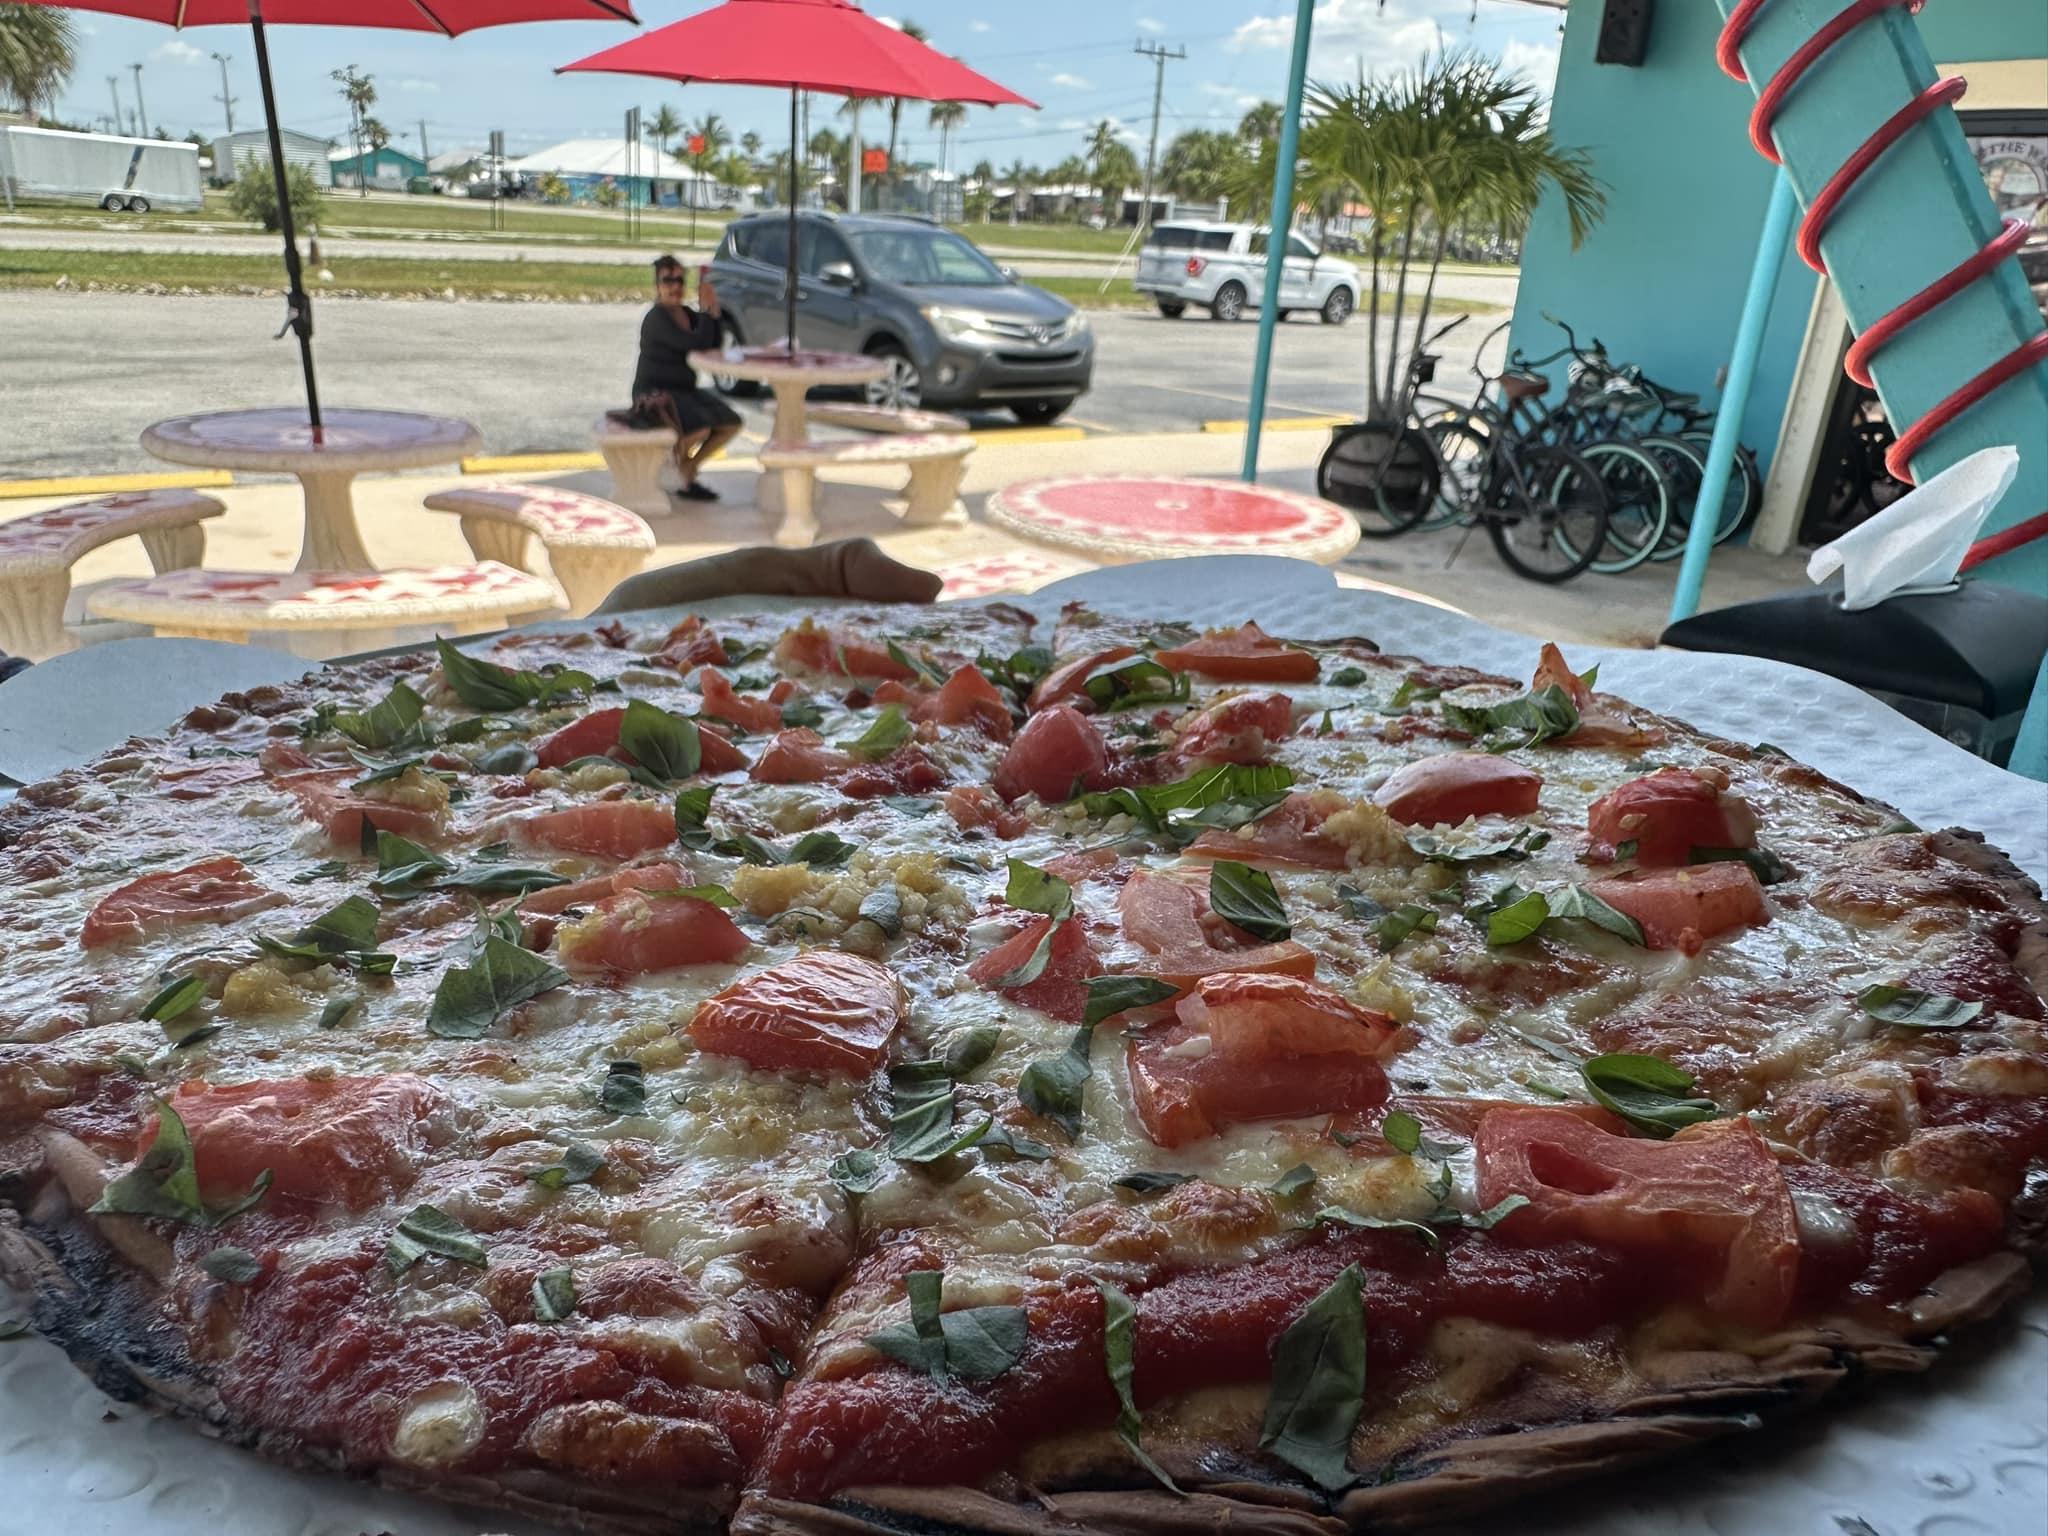 Pet Friendly Hole in the Wall Pizza & Other Delicious Things